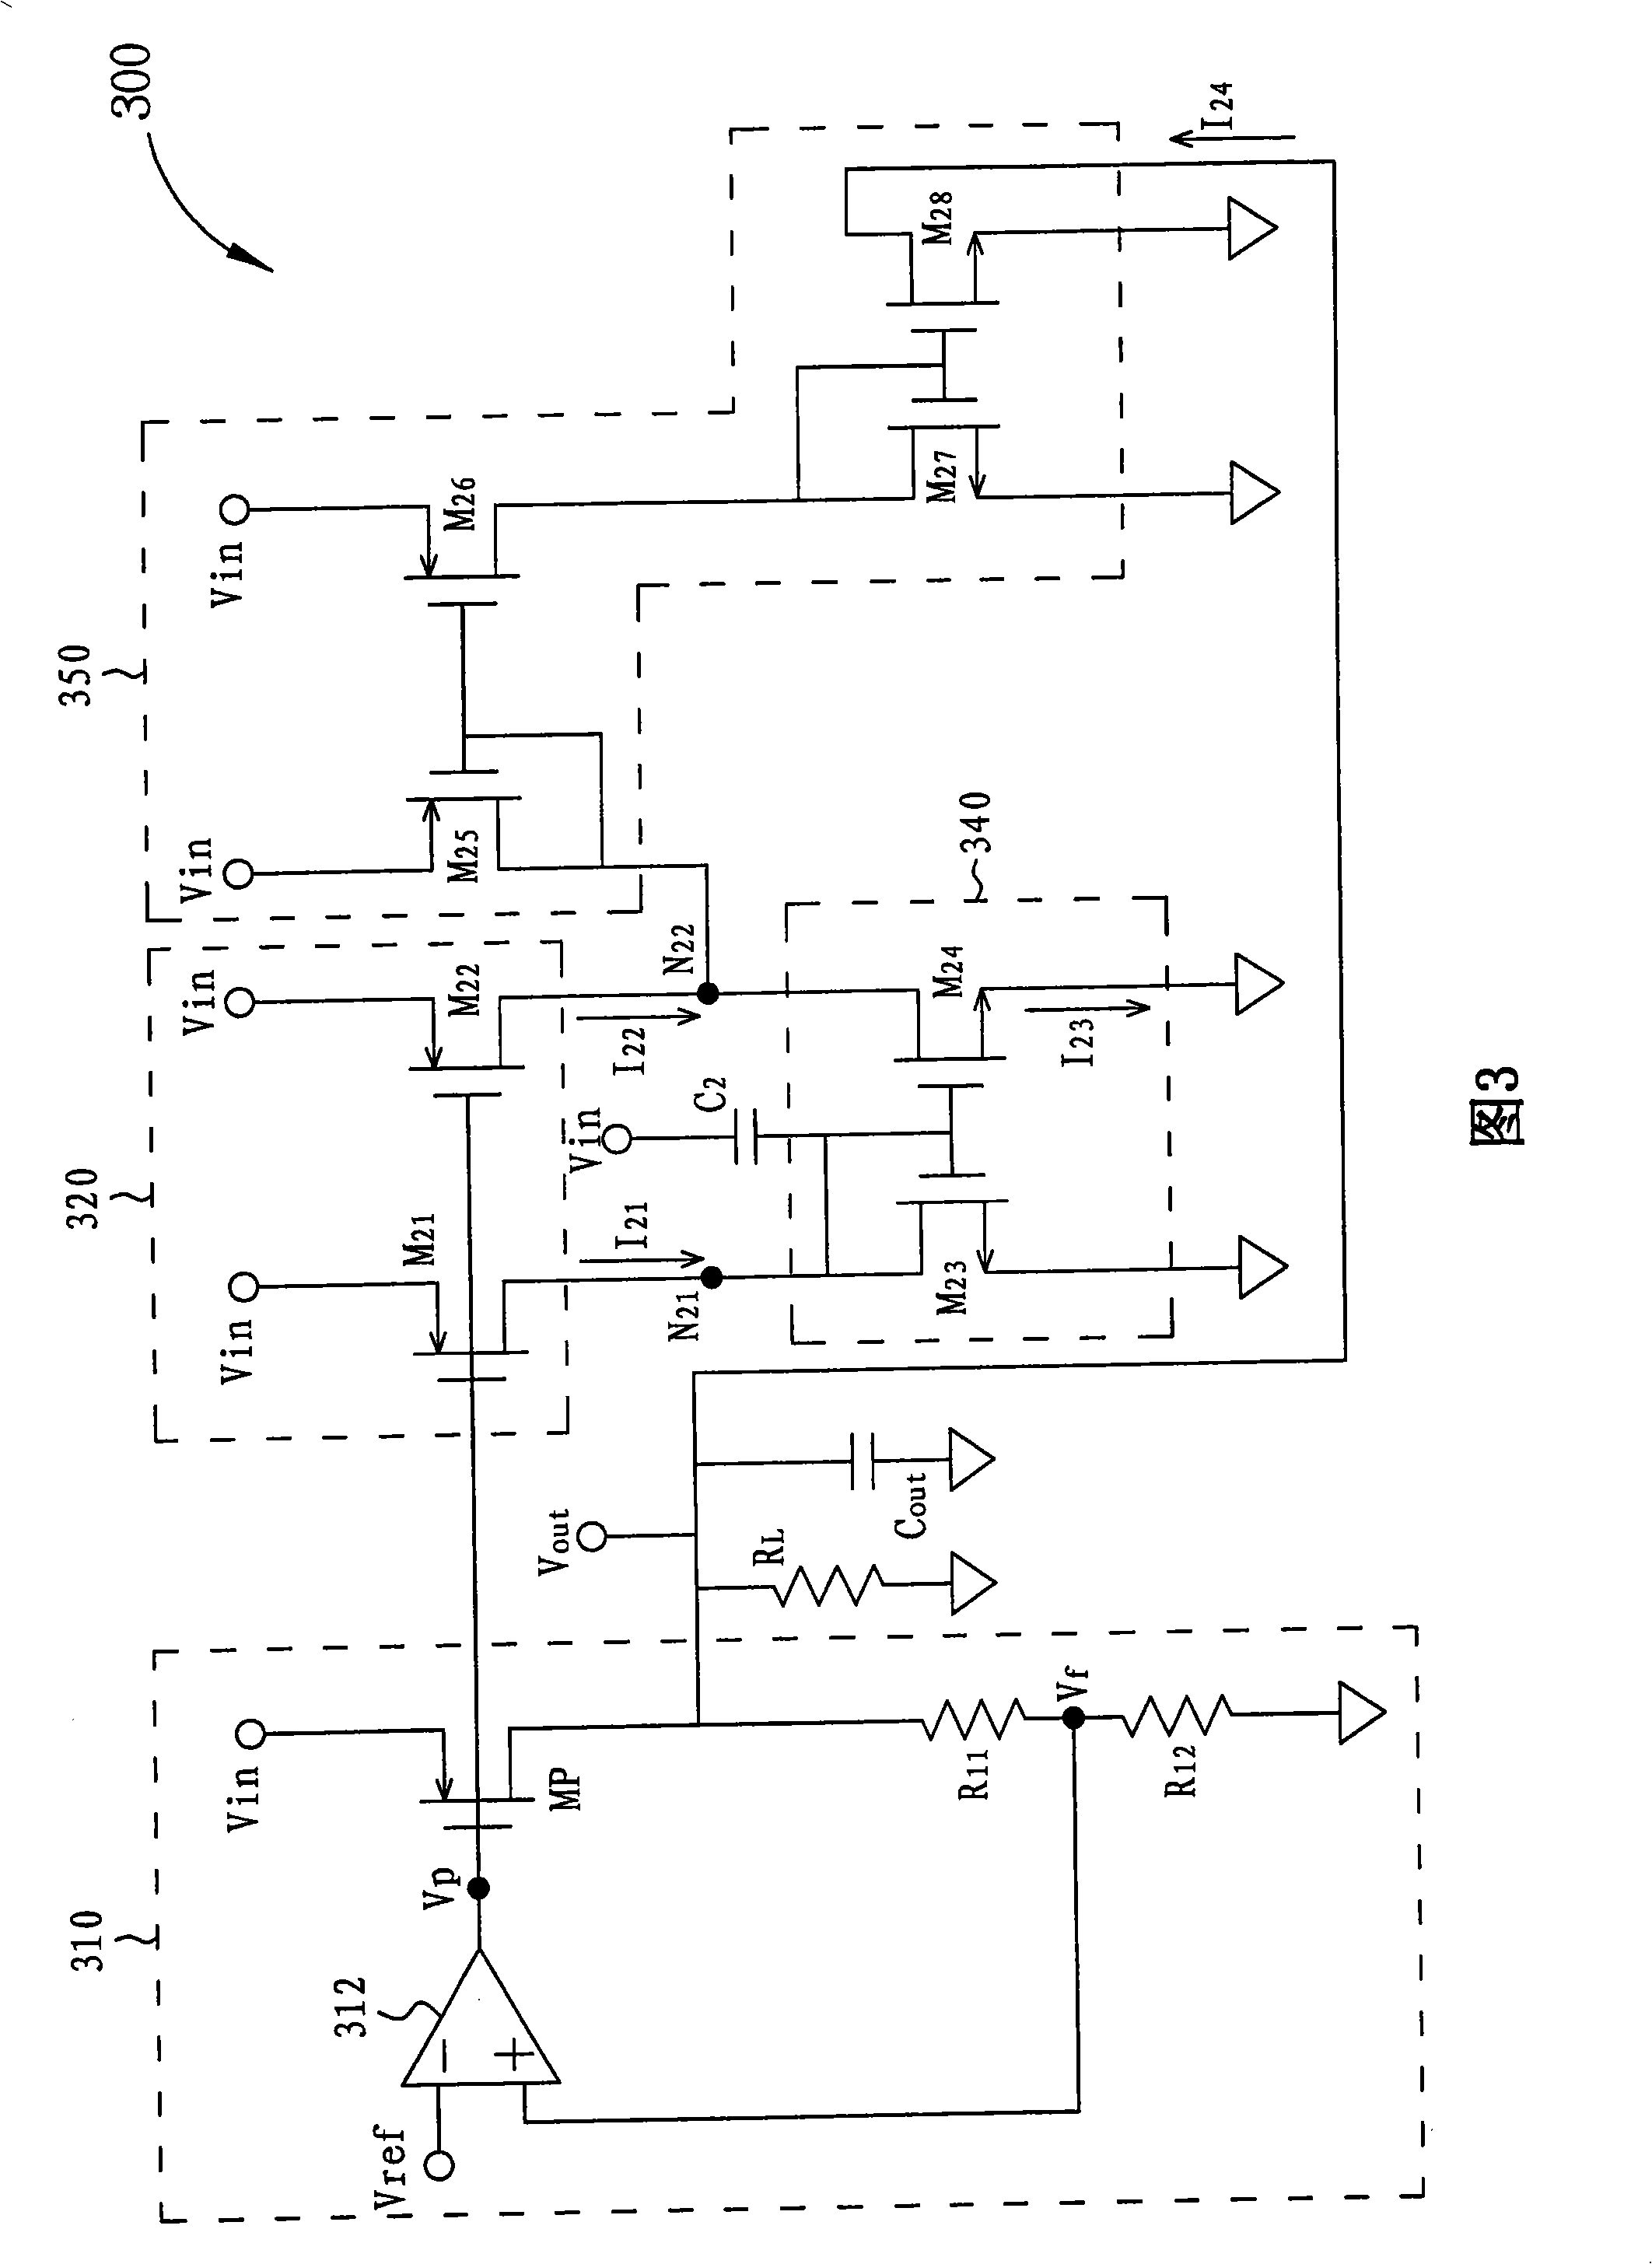 Voltage regulating circuit and method for providing regulated output voltage